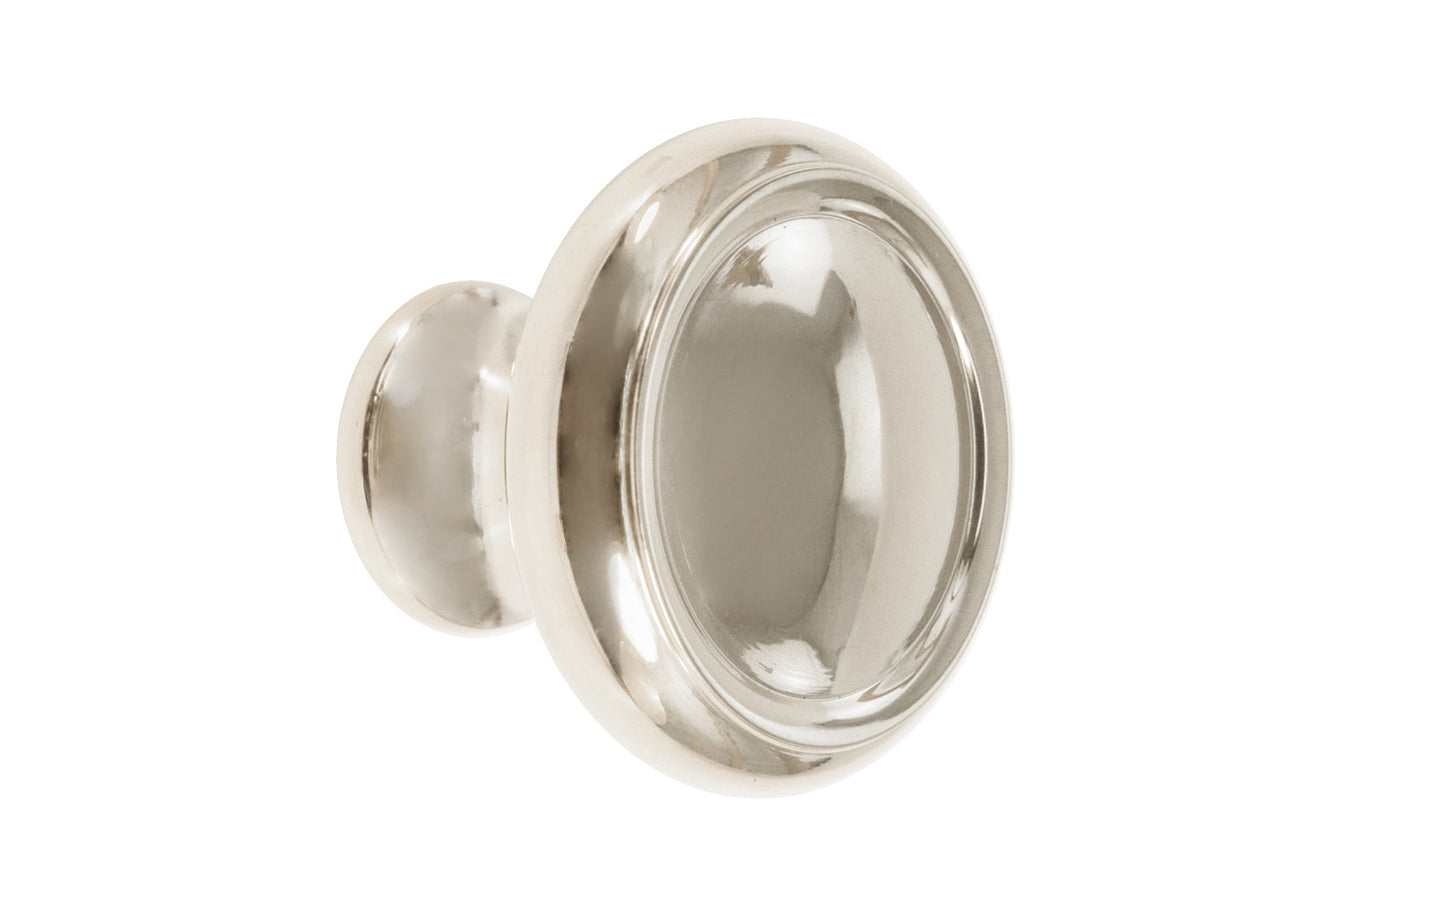 Solid Brass Dome-Style Cabinet Knob ~ 1-1/4" Diameter. Made of solid brass material. The knob is designed in the Mid-Century style of hardware, but will fit in with any time period up to the current modern styles. Great for kitchens, bathrooms, on furniture, cabinets, drawers, small doors, cabinet doors. Dome knob. Polished Nickel Finish